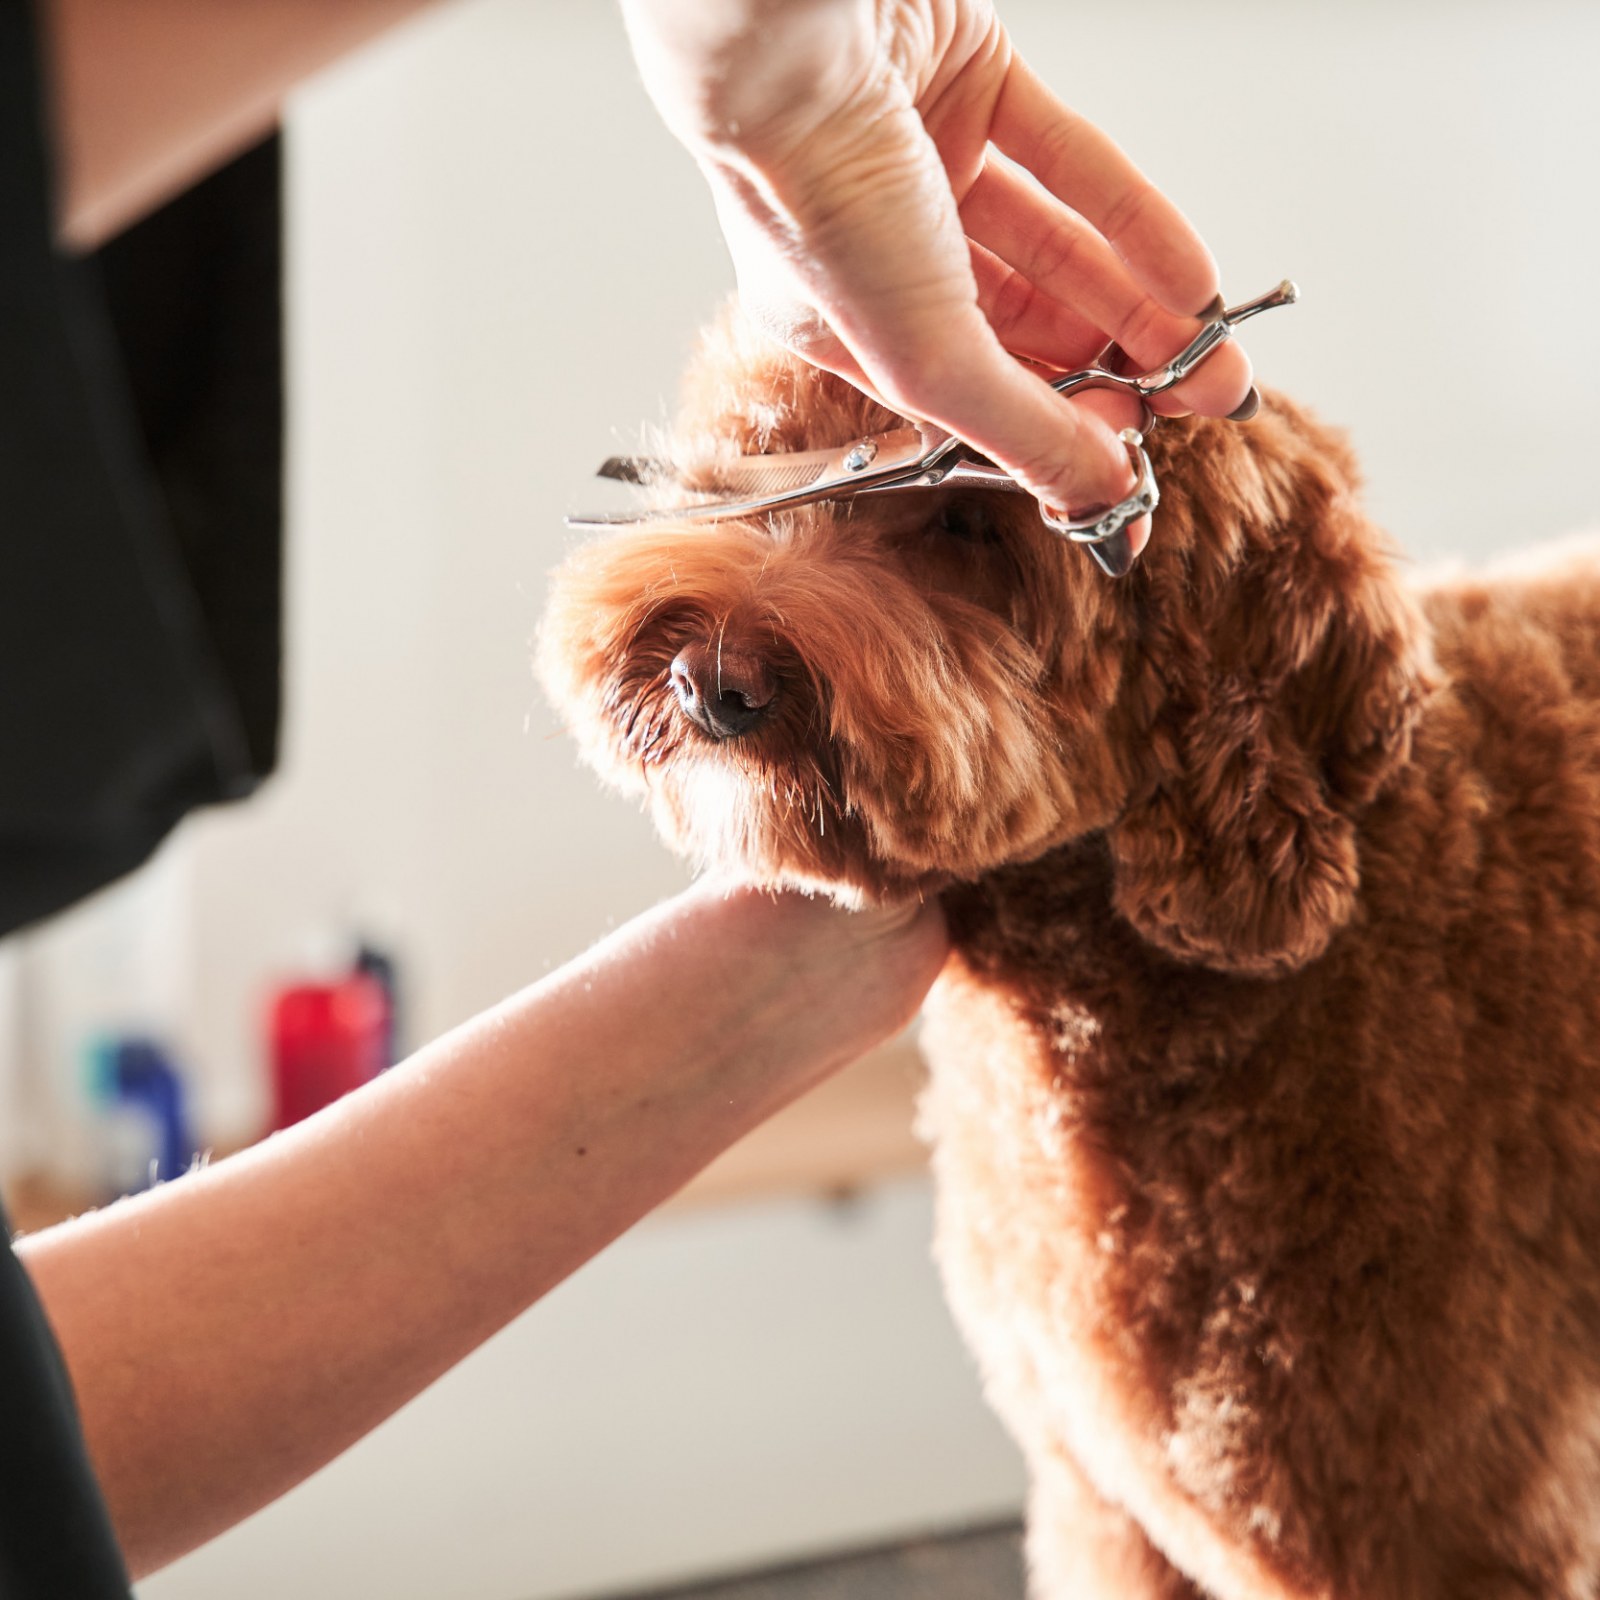 Tips To Groom Your Dog At Home And Save Up To $900 A Year